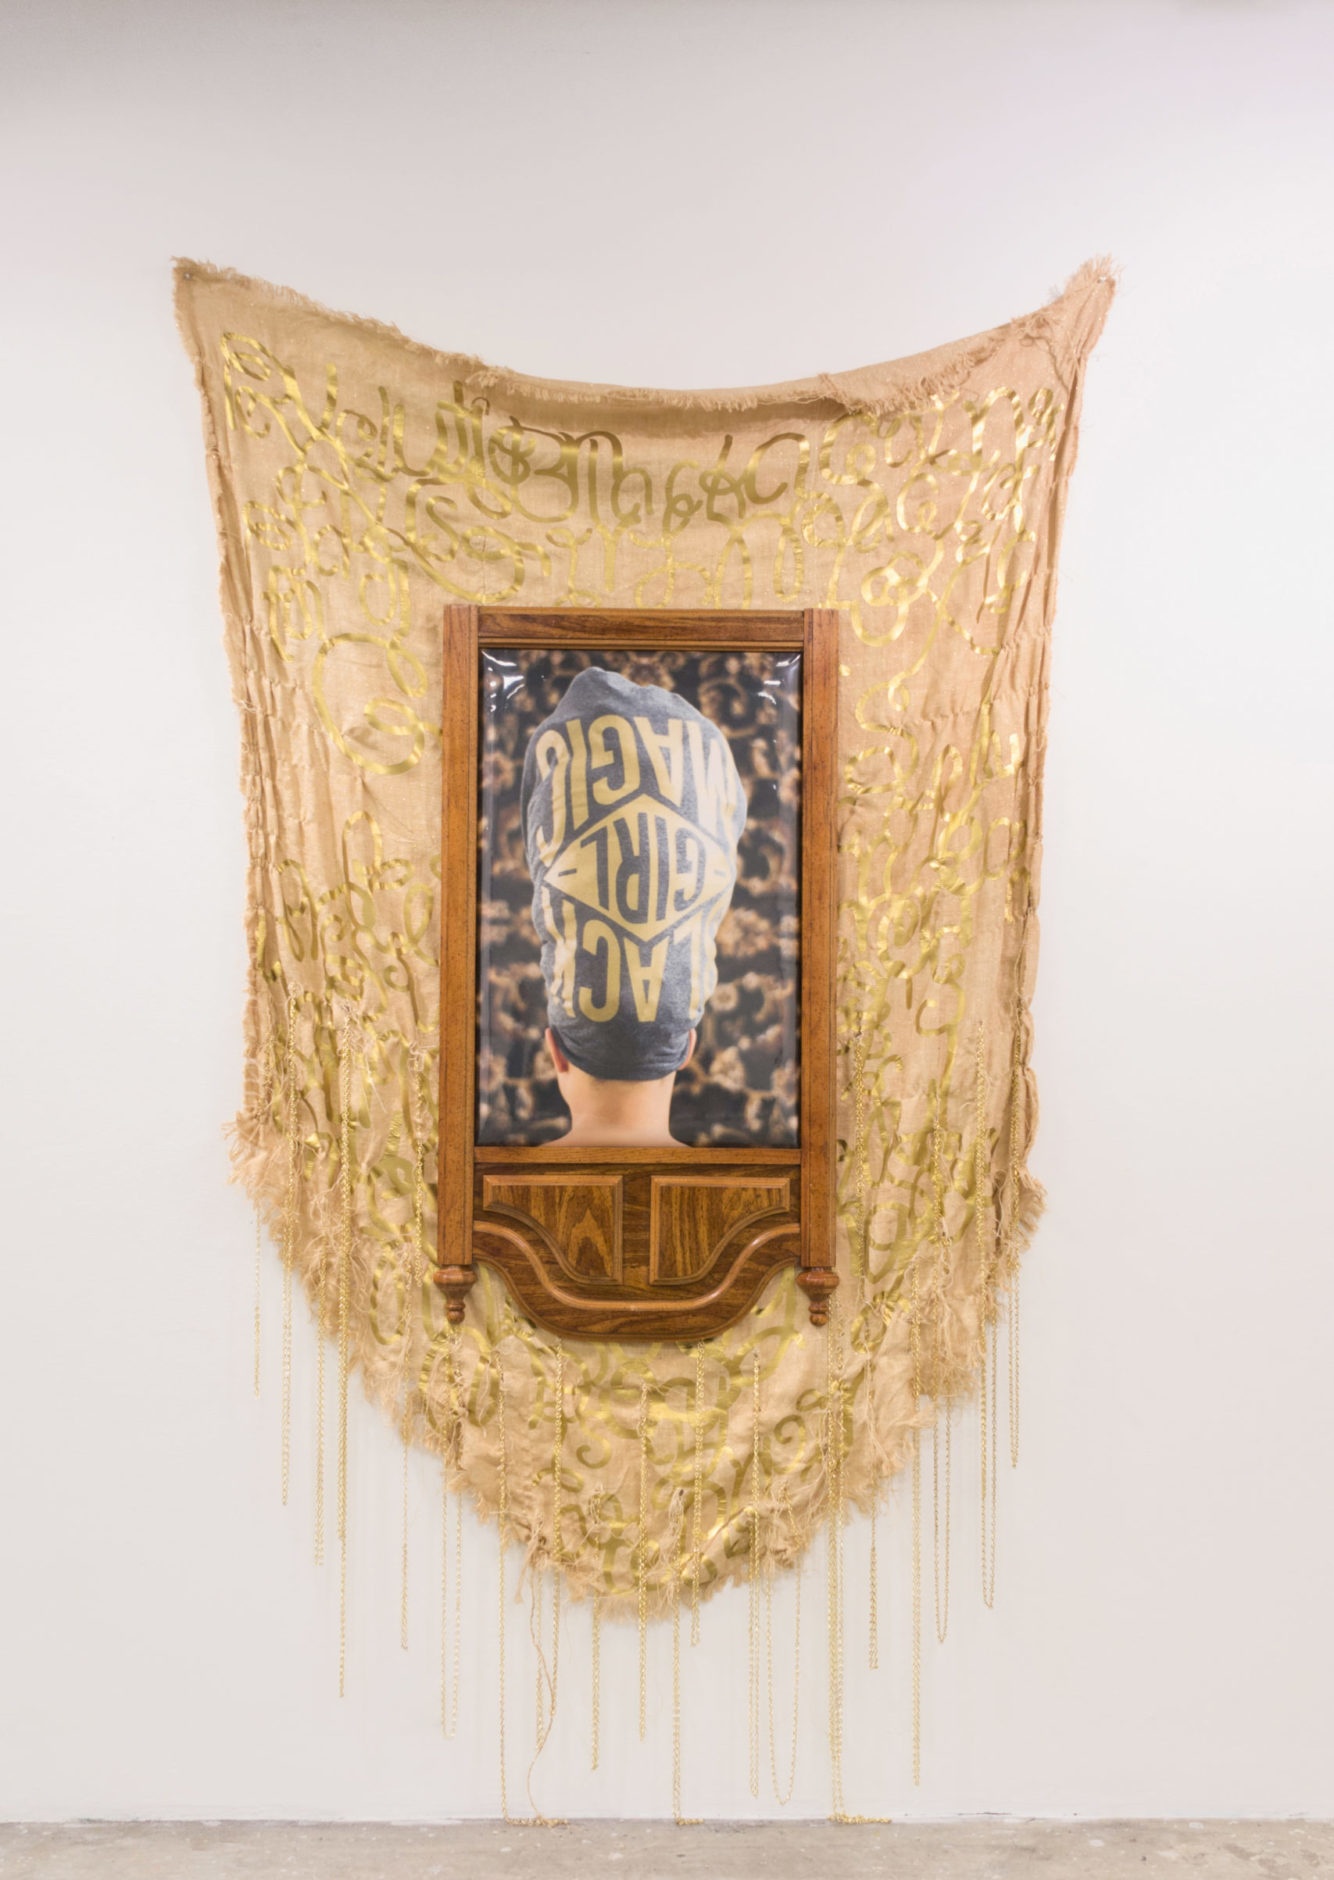 An asymmetrical gold-painted fabric hangs behind a wooden dresser mirror frame; inside the frame is a photo of the back of a black woman's head wrapped in cloth that reads 